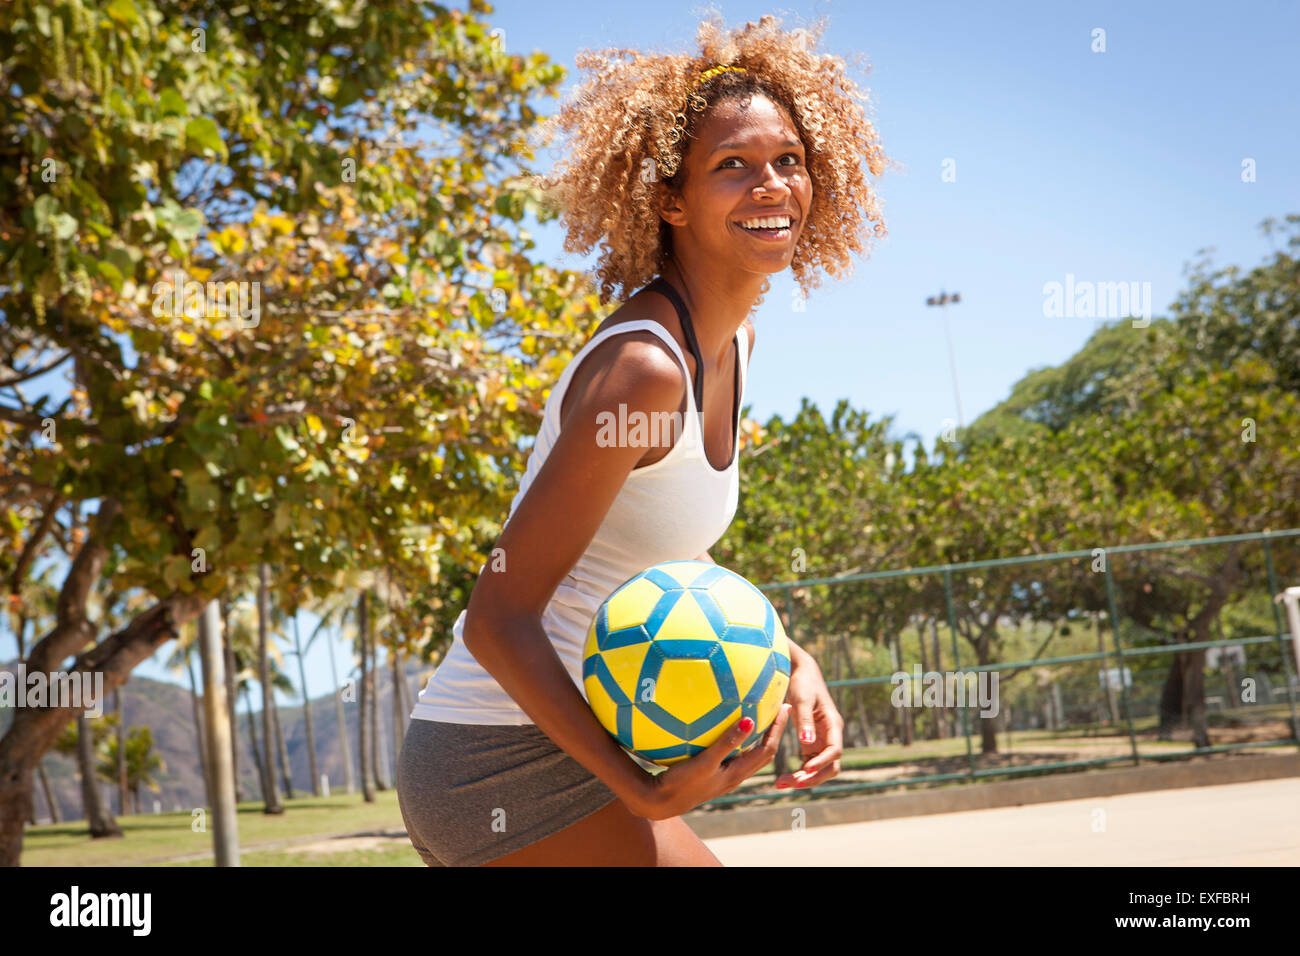 Portrait of young female basketball player with ball Stock Photo